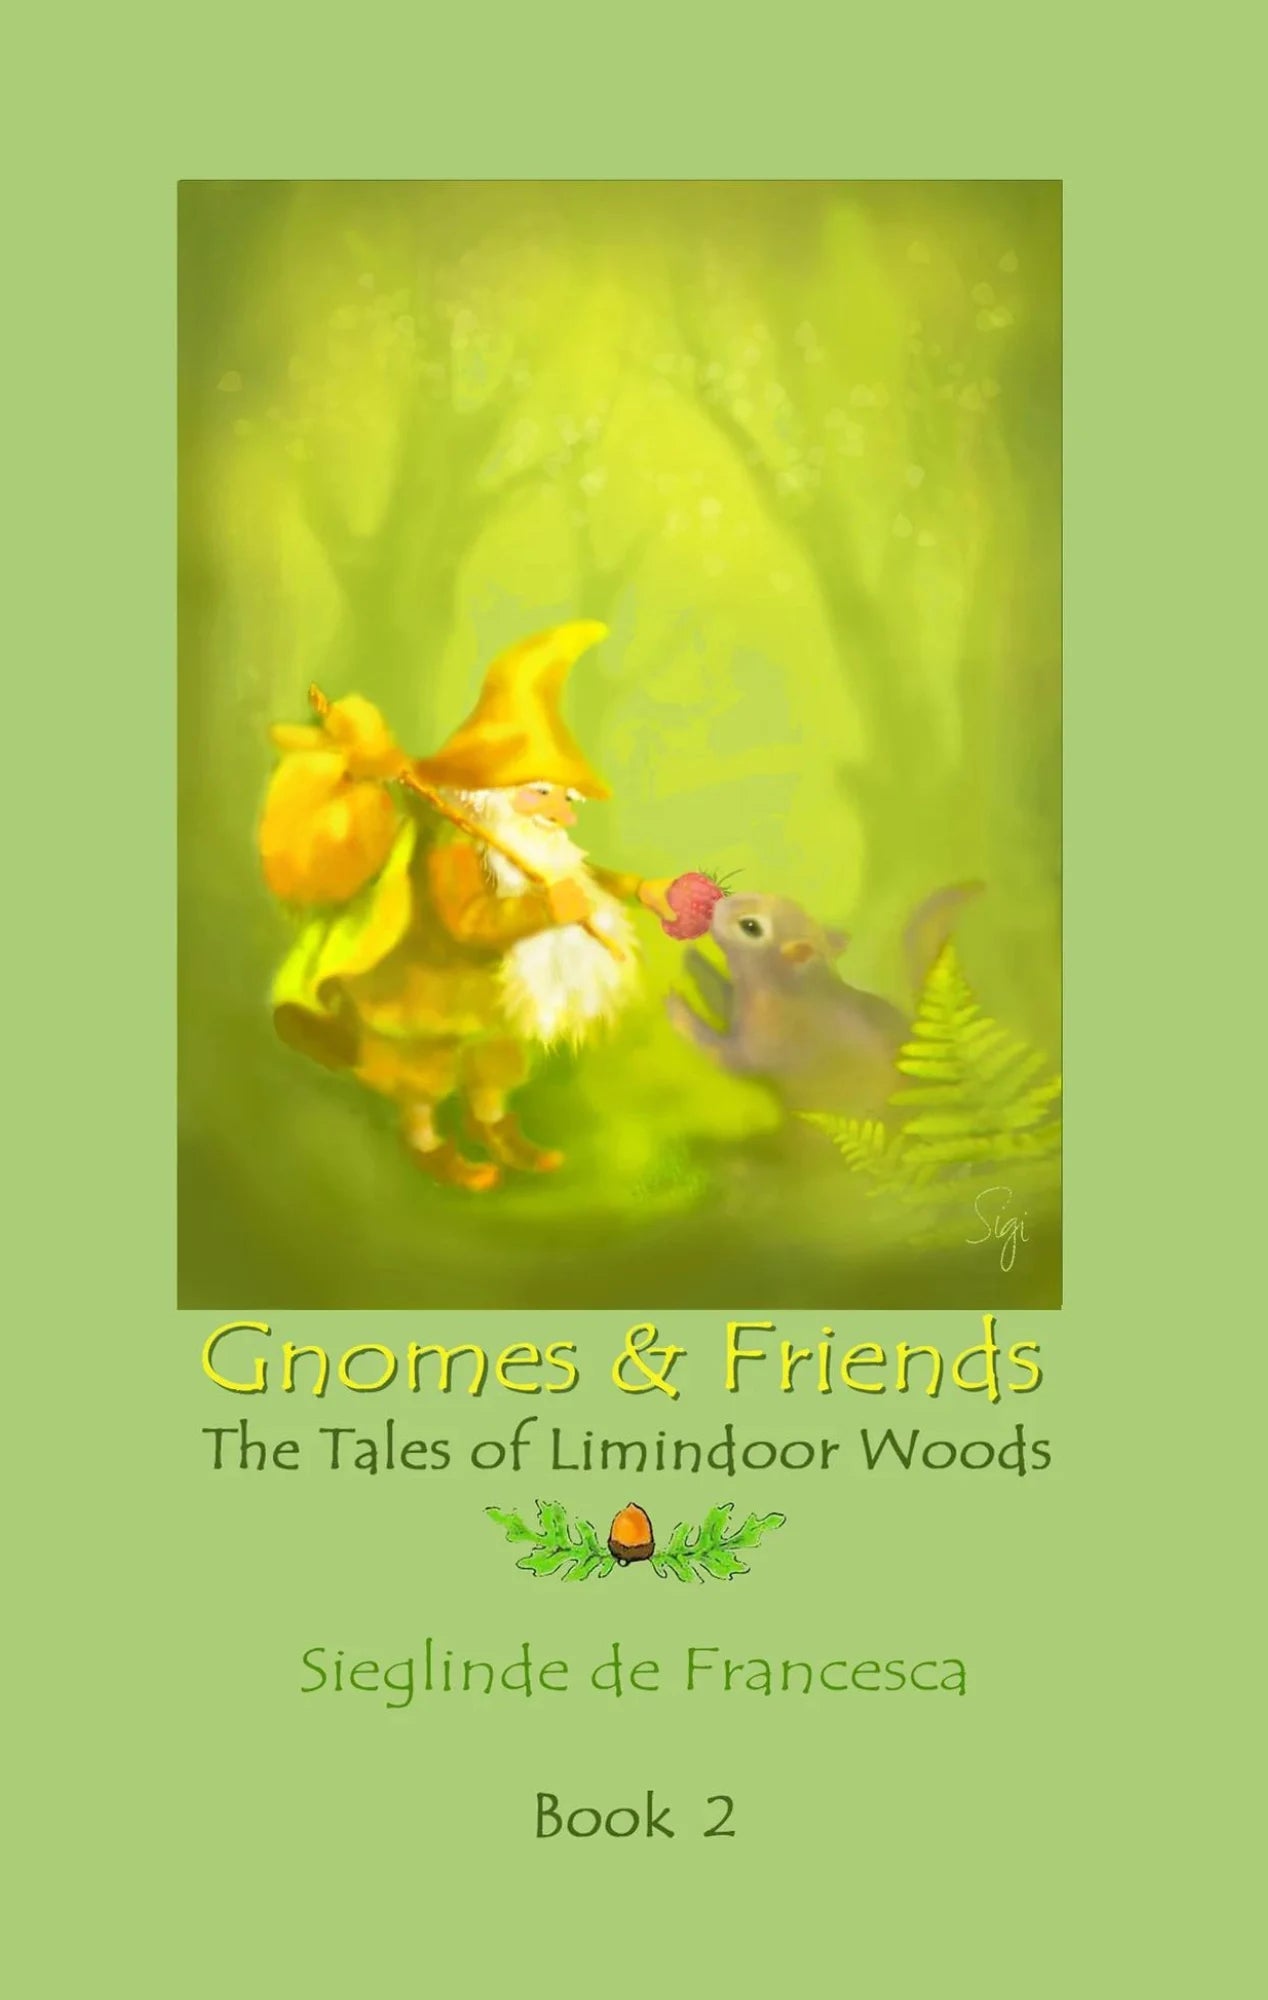 The Tales of Limindoor Woods: Gnomes and Friends, Book 2 - Alder & Alouette